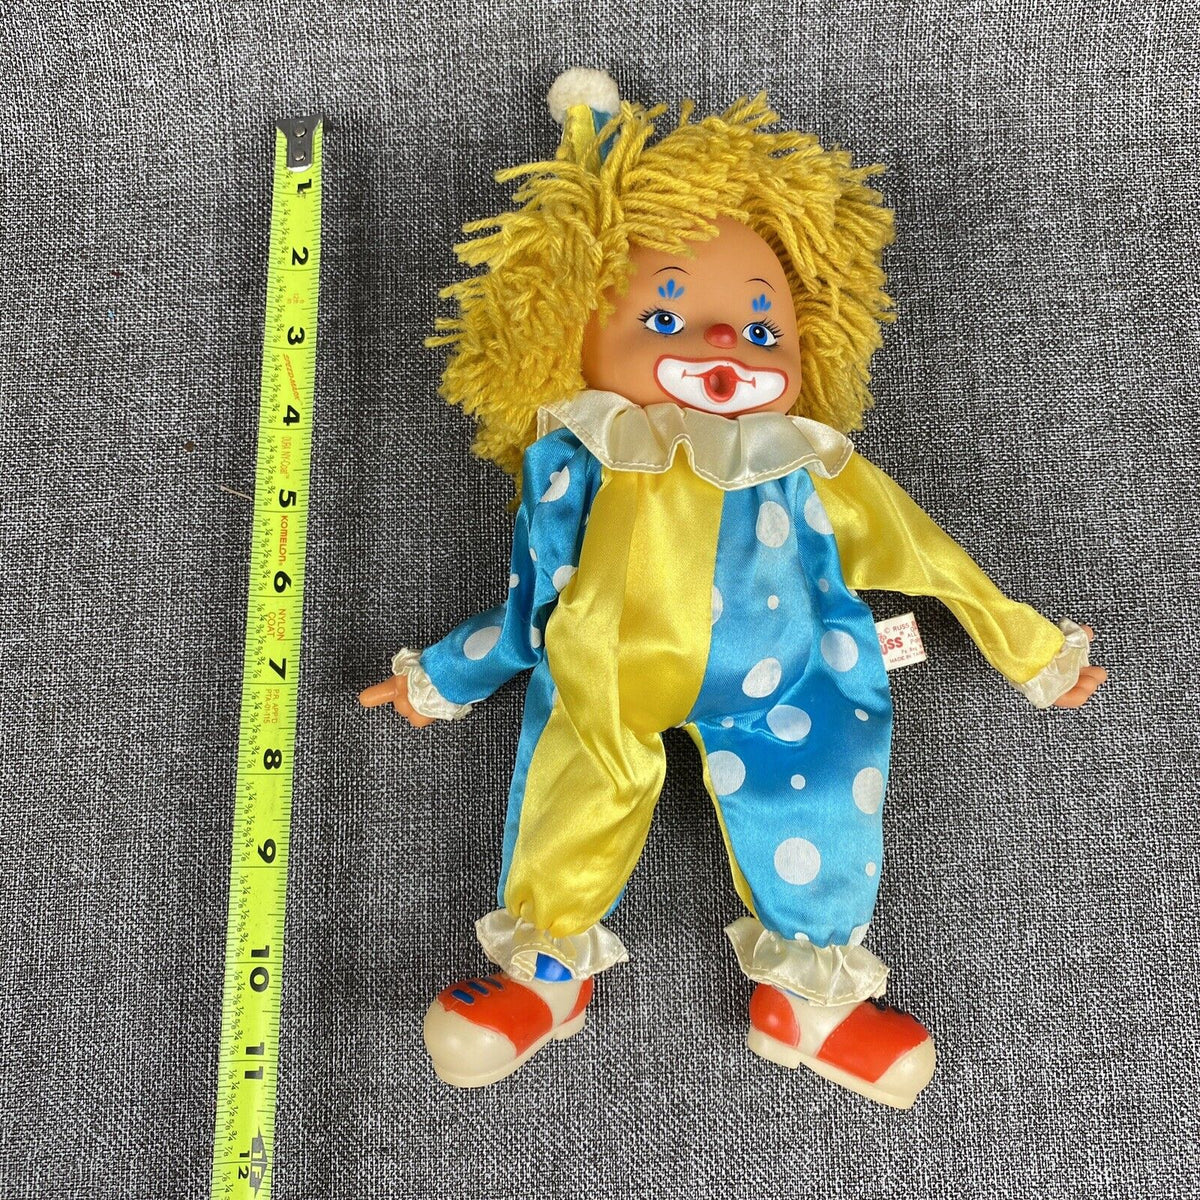 Vintage APPLAUSE Finger Thumb Sucking Clown Doll